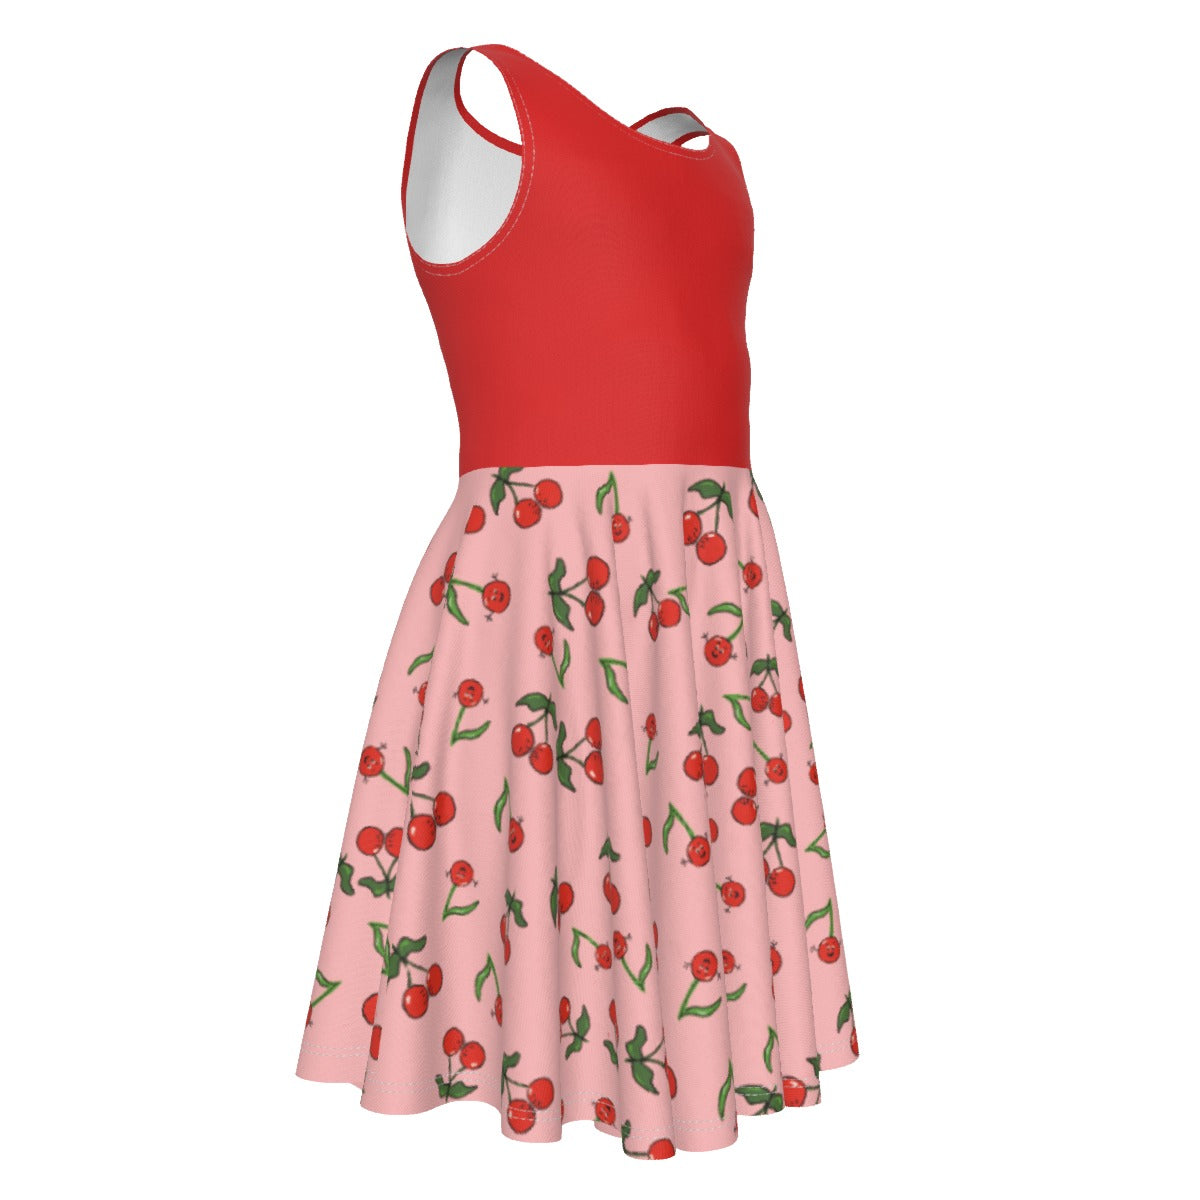 Girls Cherry Dress with Red Top